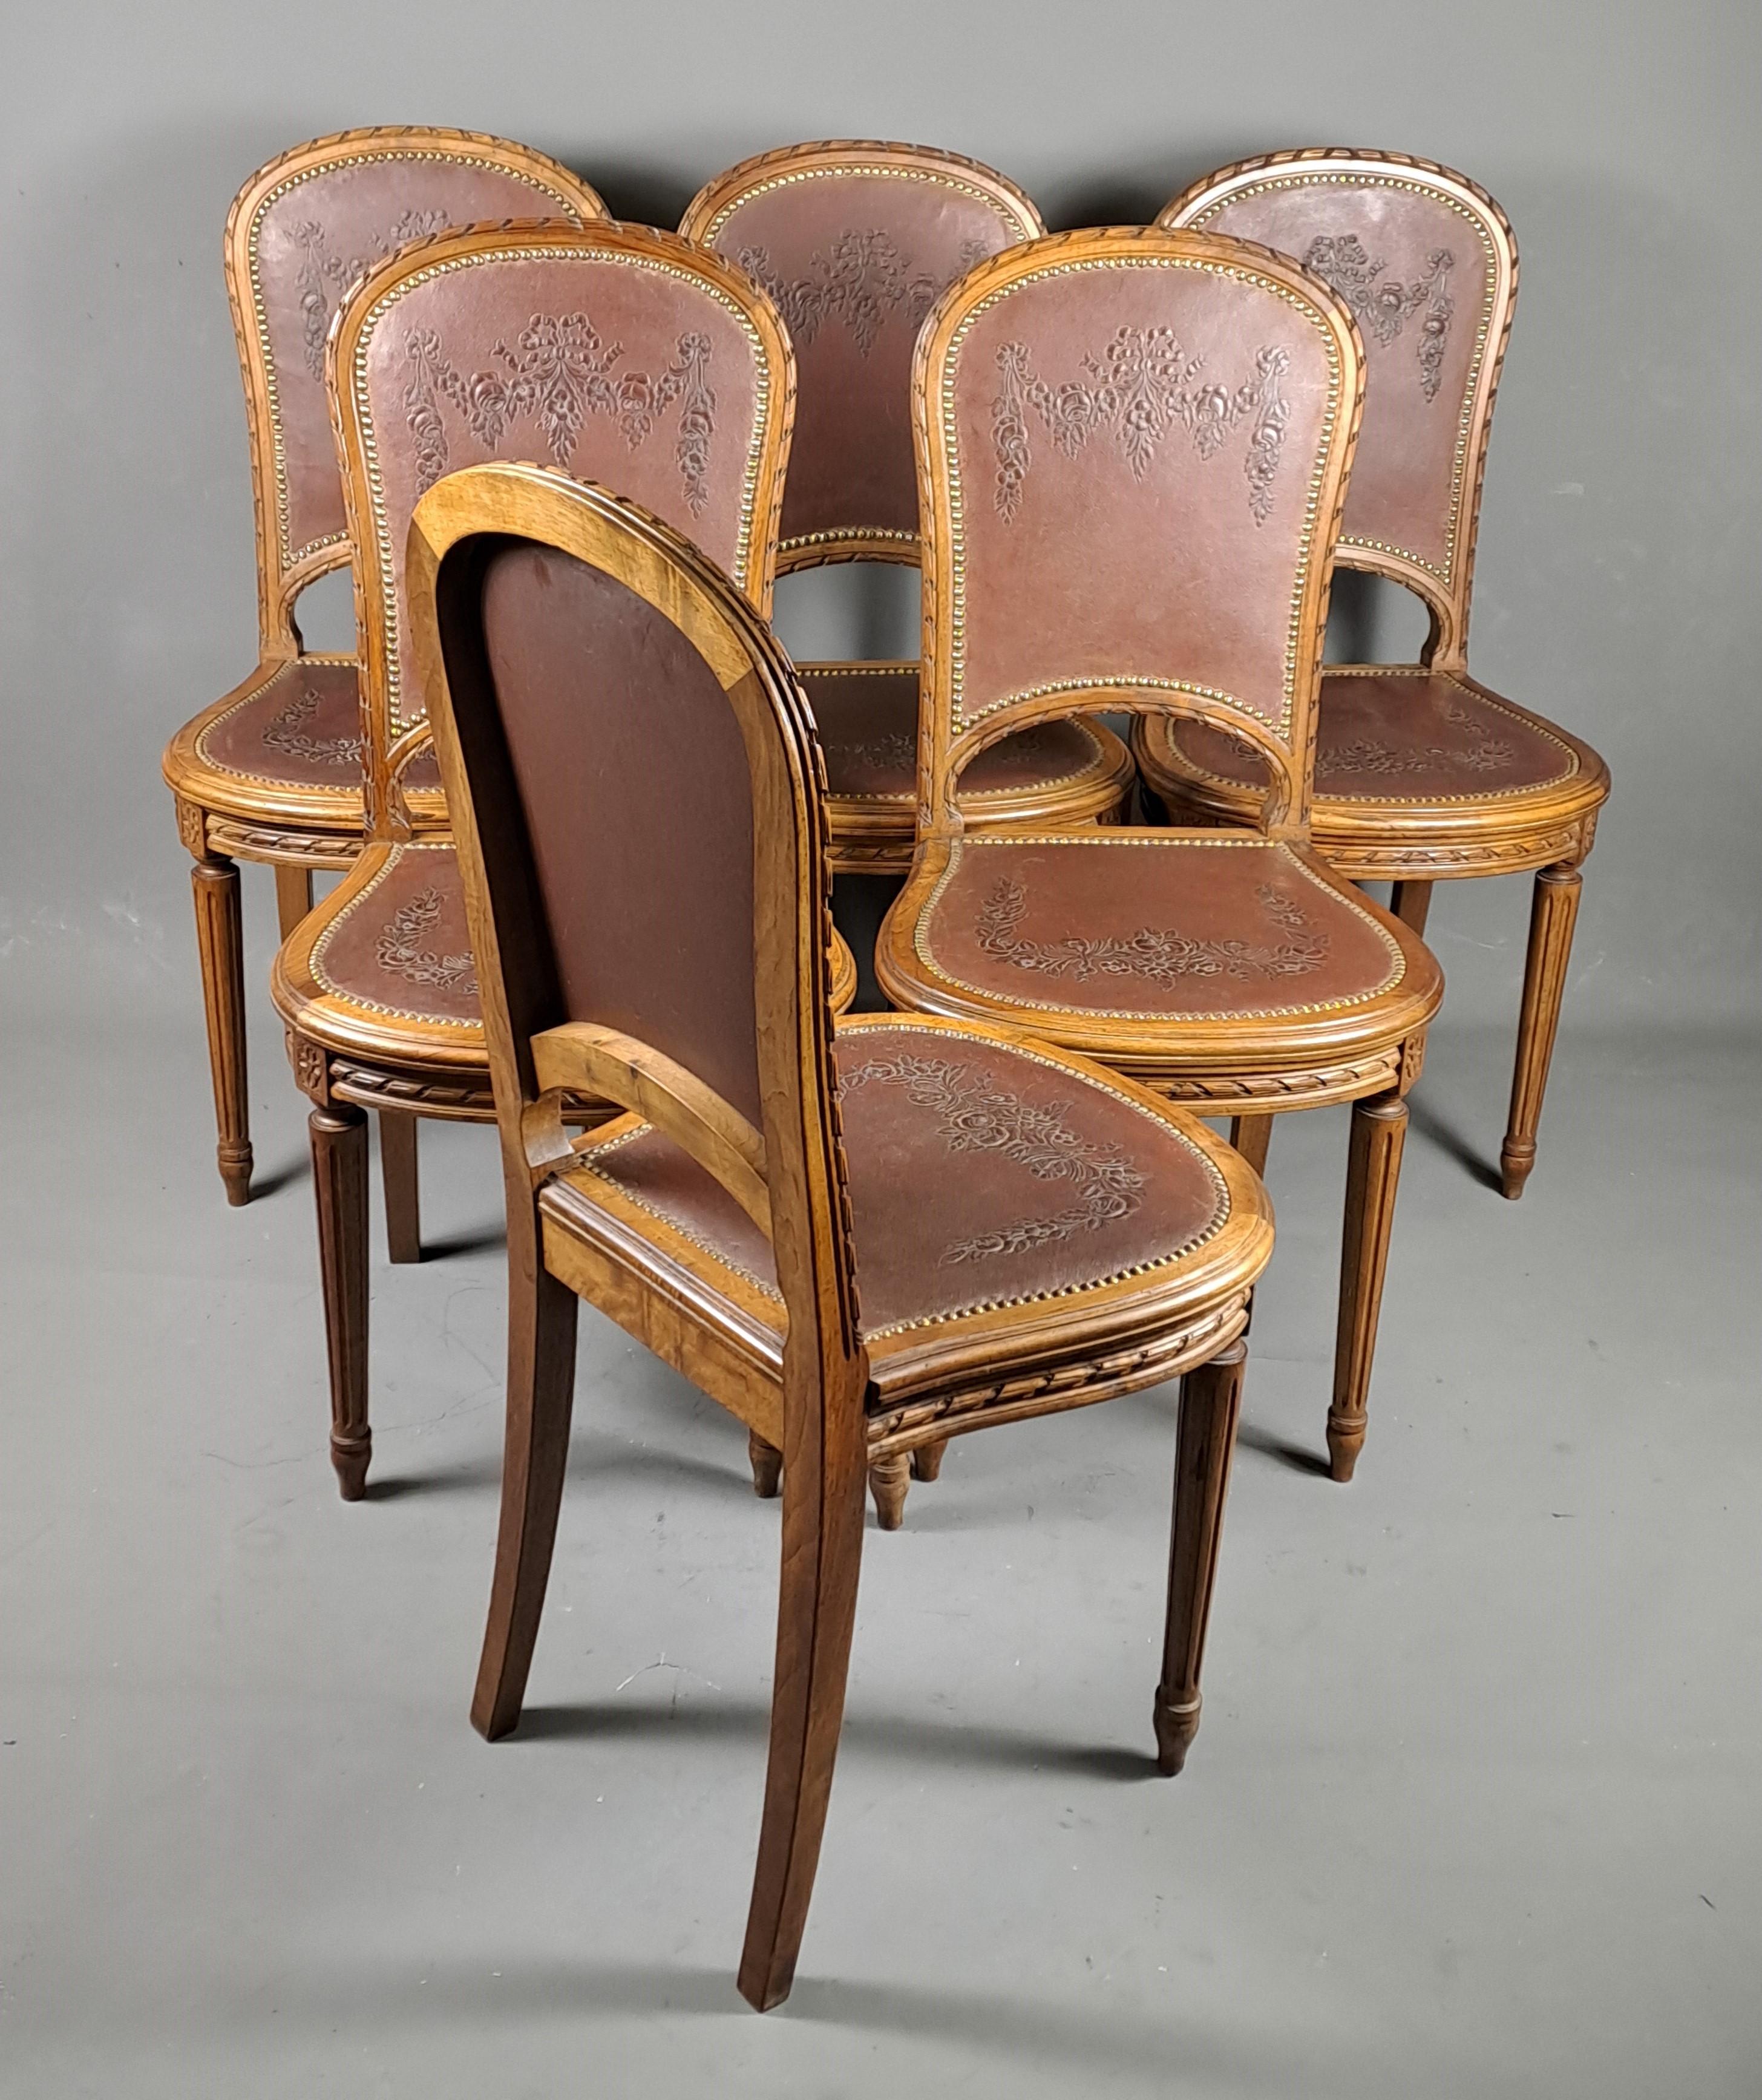 Series Of 6 Louis XVI Style Chairs In Solid Walnut And Embossed Cordoba Leather  3